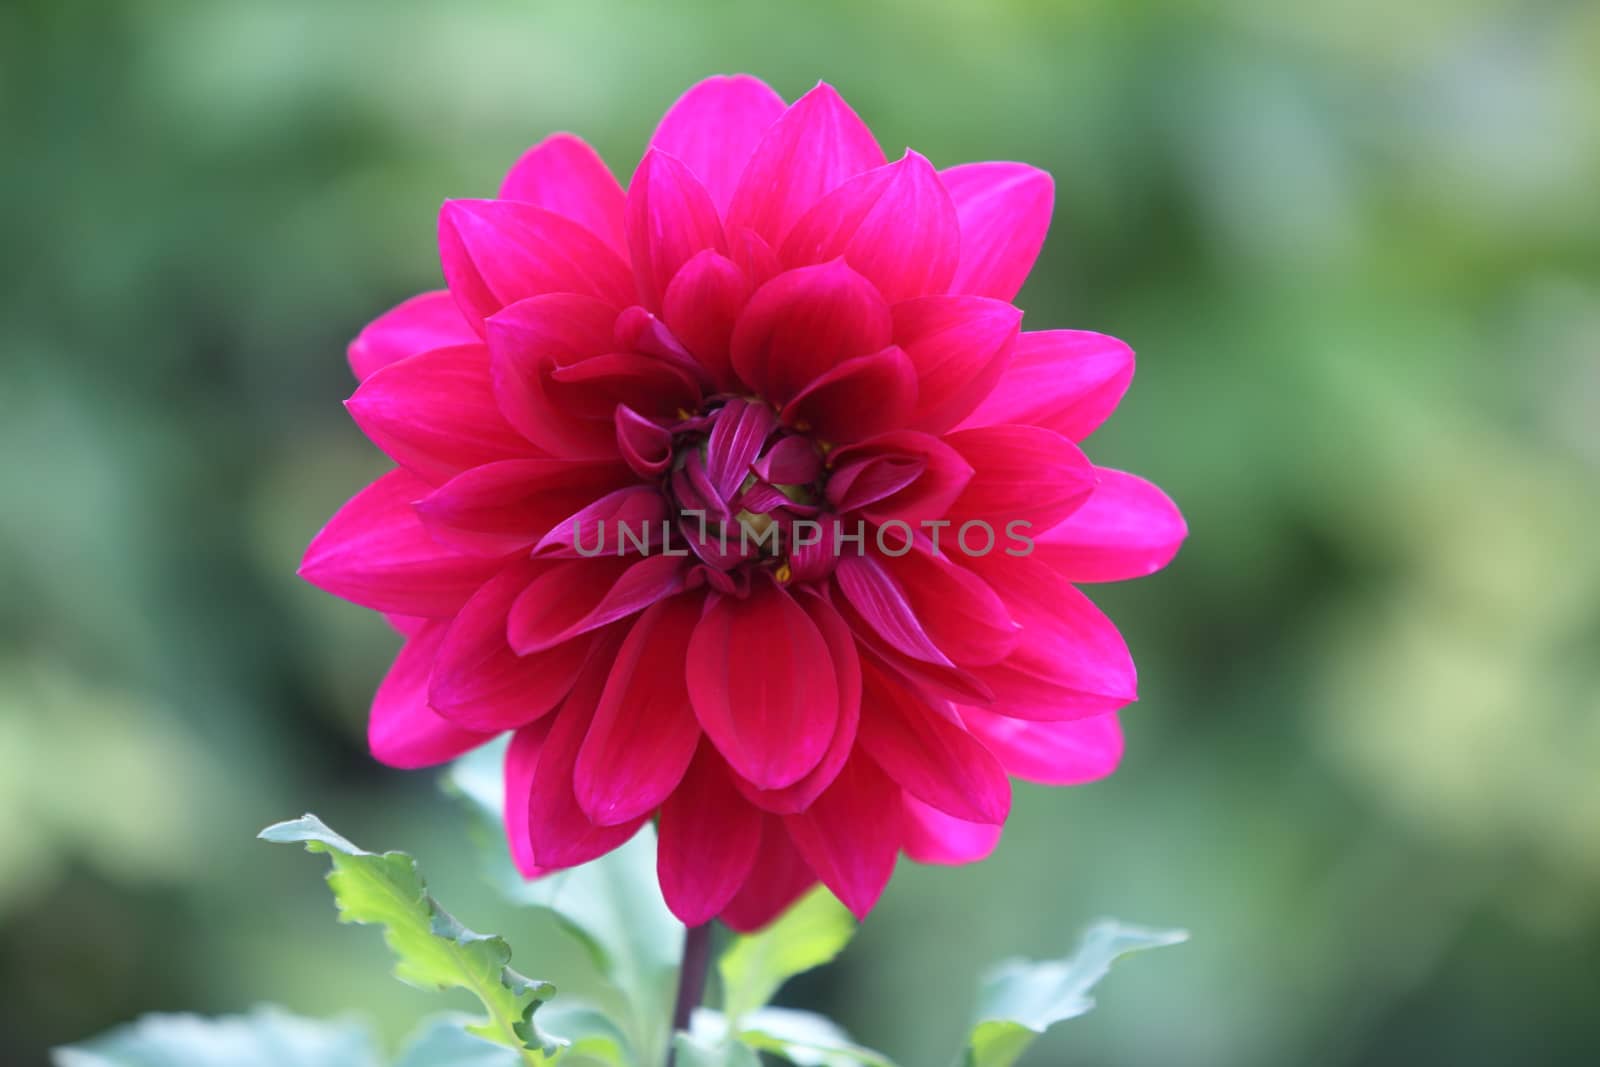 a purple dahlia, plant of the Asteraceae family and native to Mexico